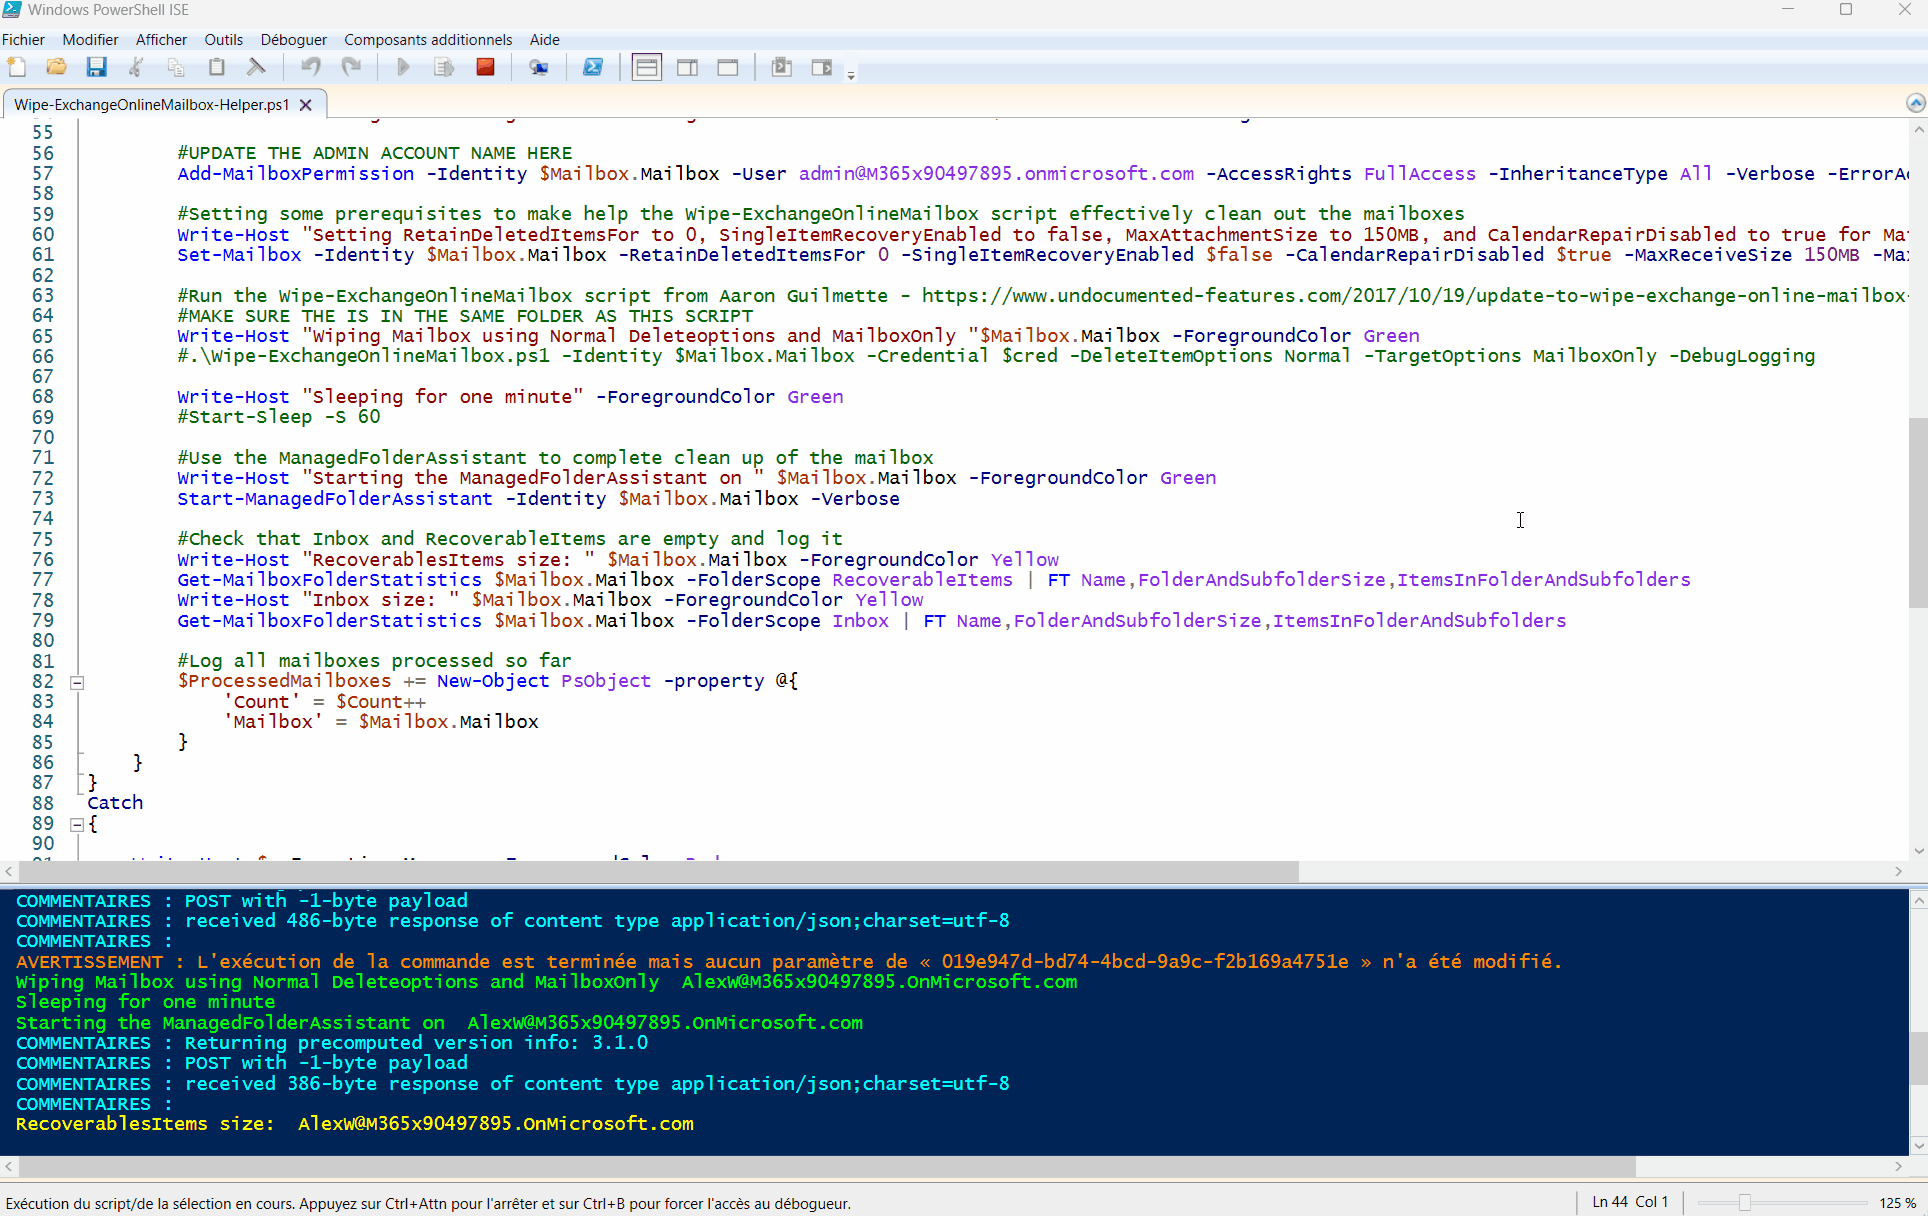 An animated GIF of the PowerShell script wiping an Exchange mailbox